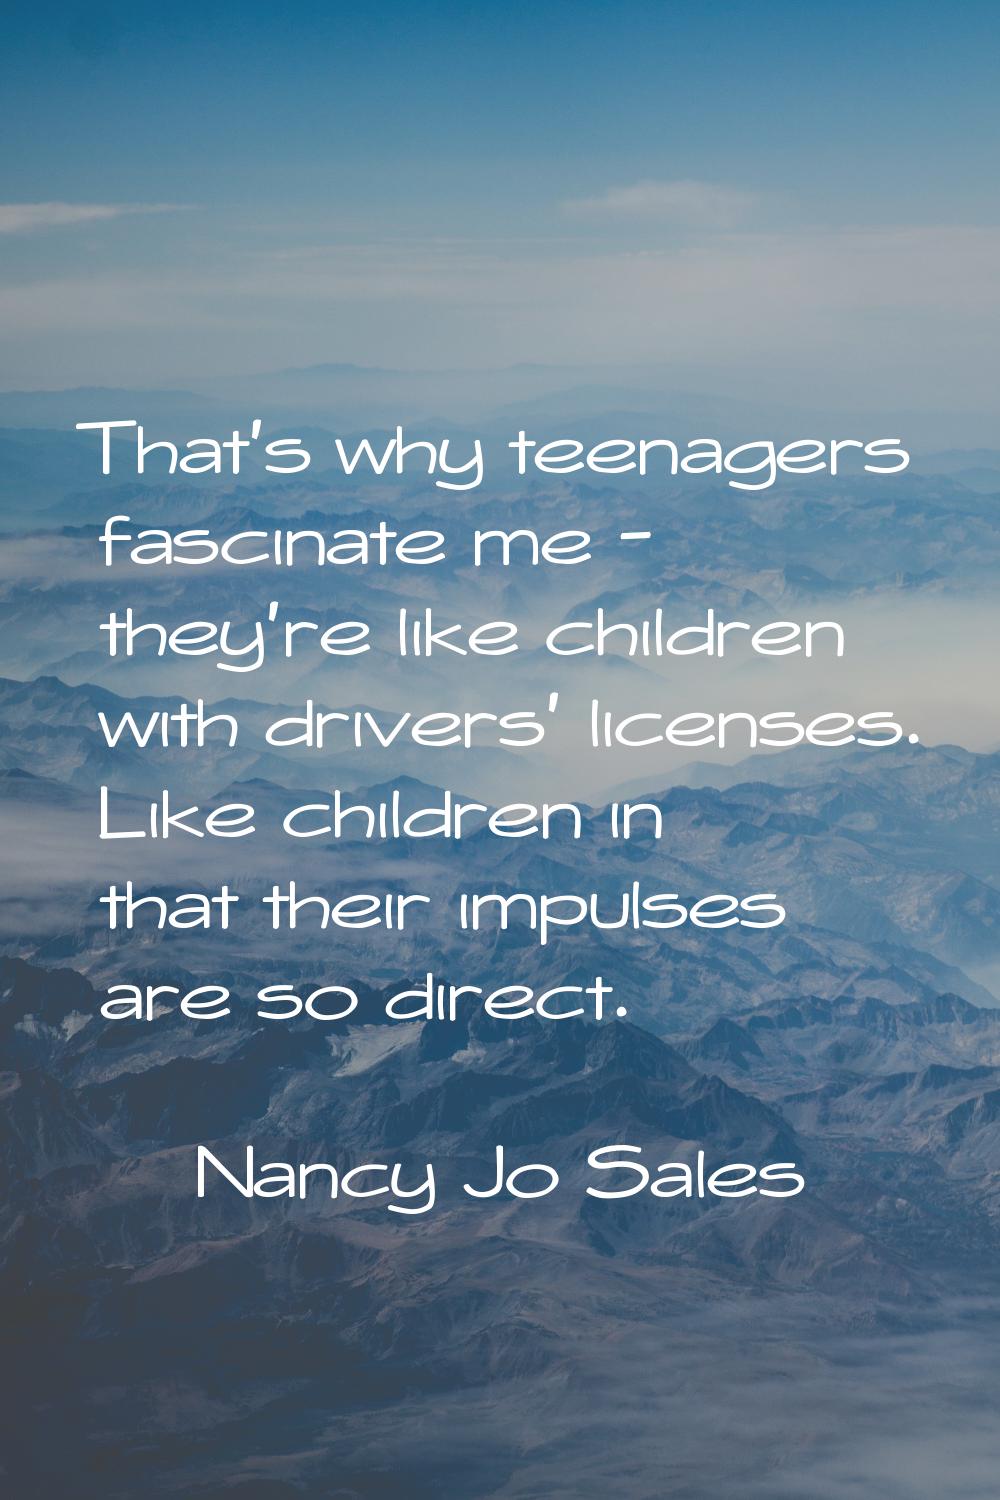 That's why teenagers fascinate me - they're like children with drivers' licenses. Like children in 